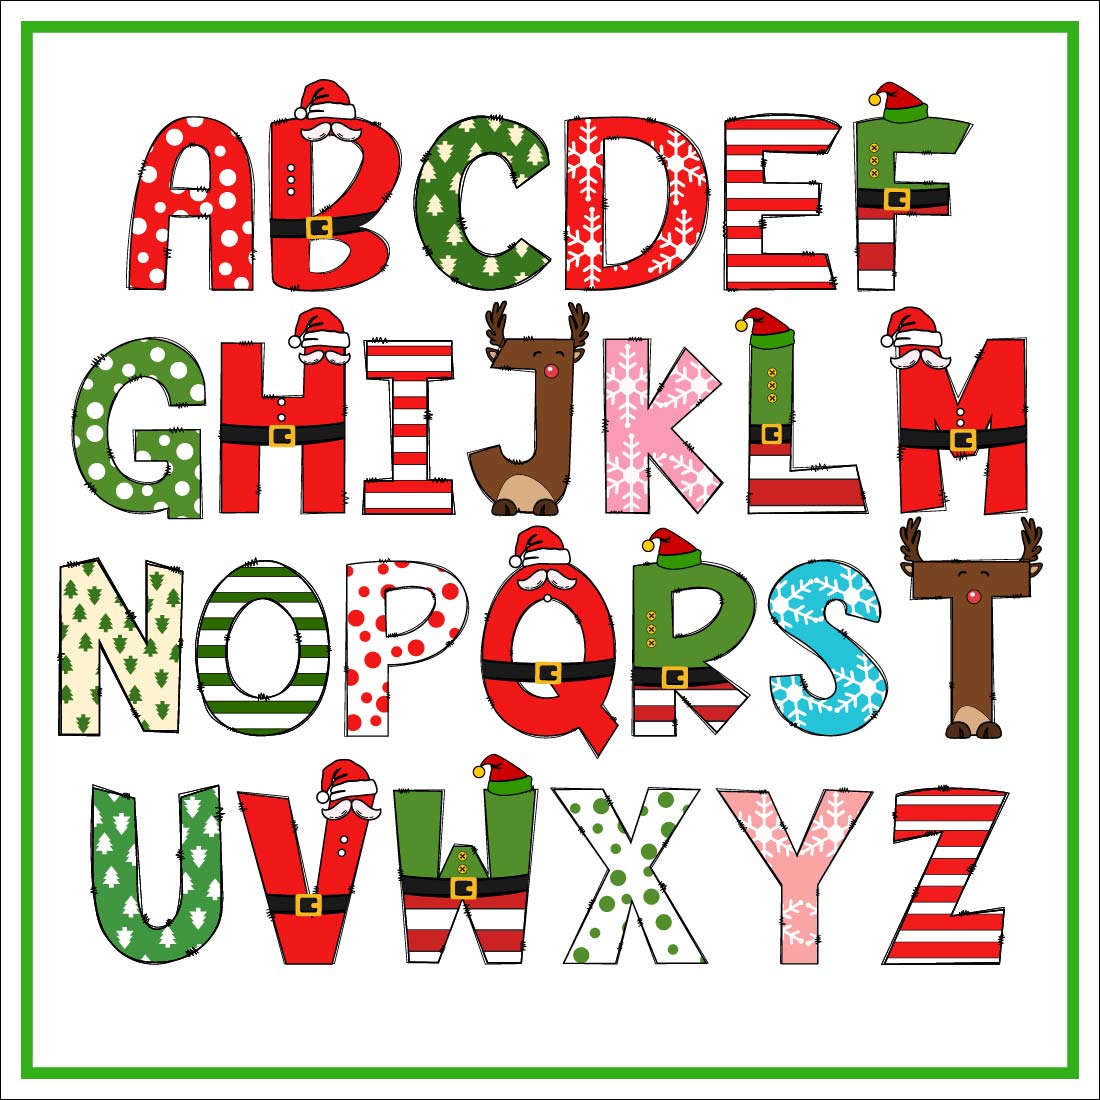 Merry Christmas Color Letters Font Design cover image.